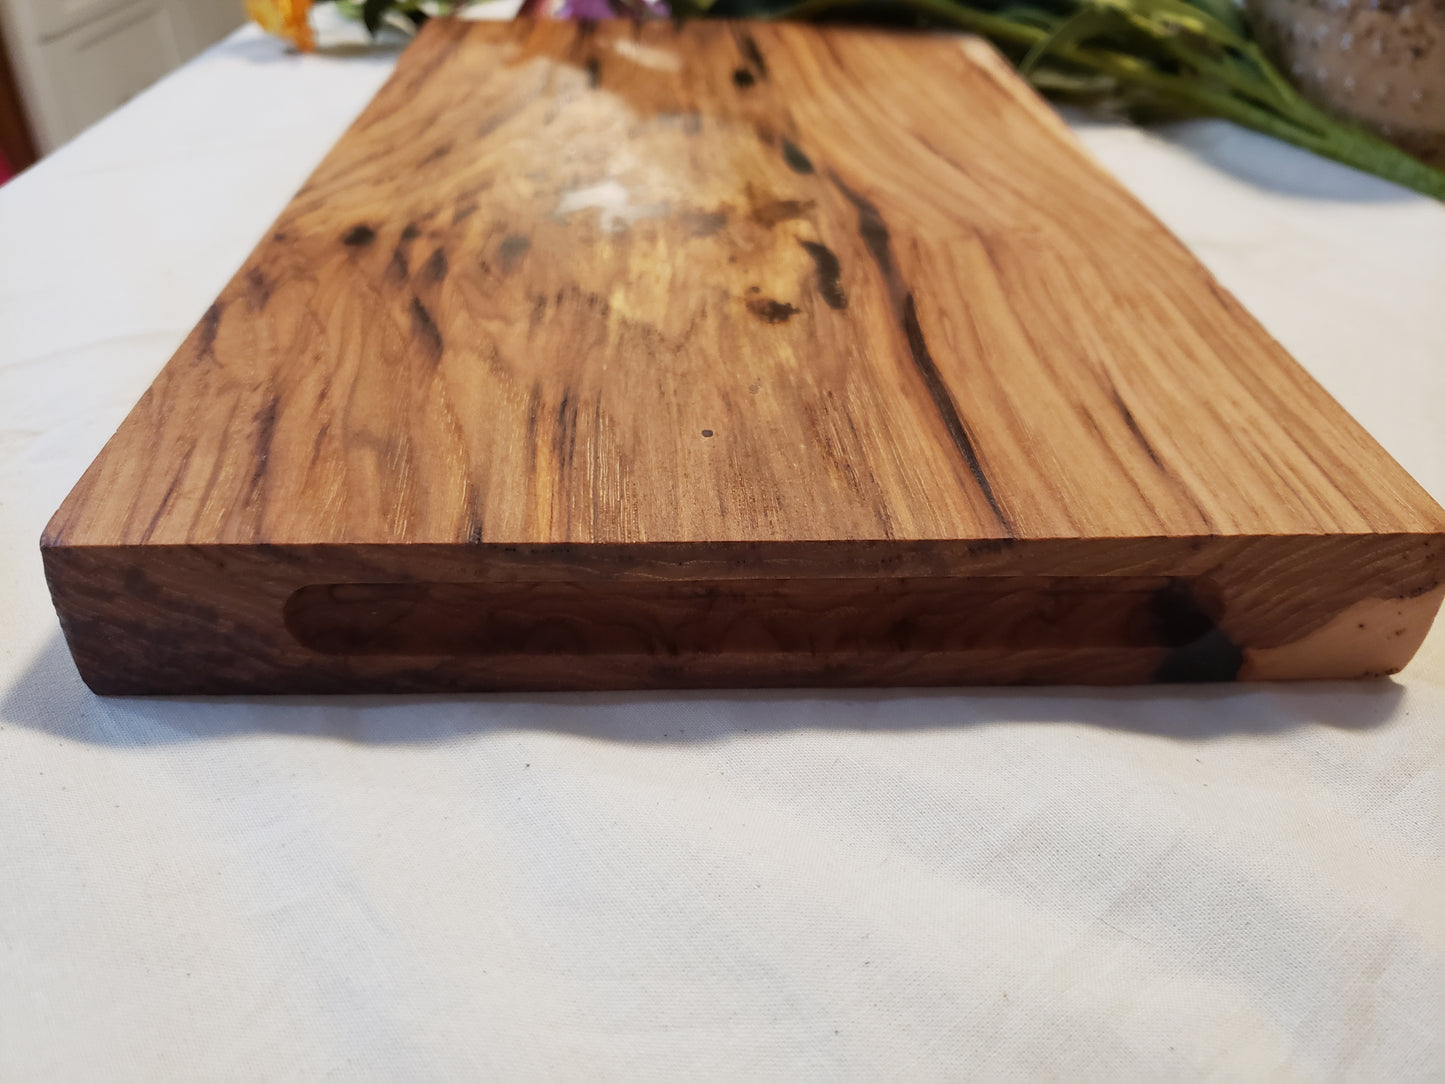 Hickory Wooden Charcuterie Board.